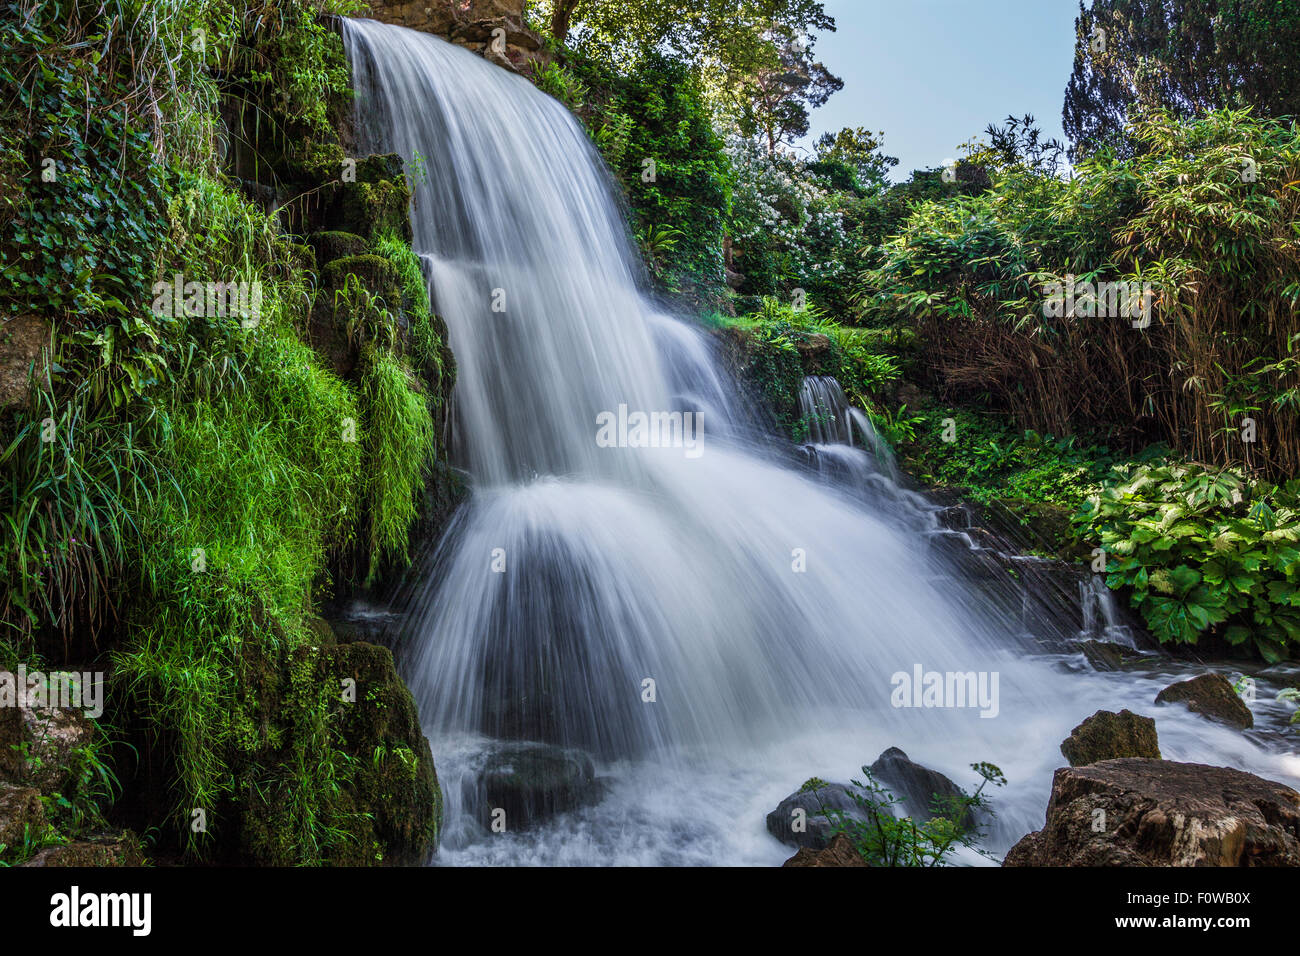 The waterfall known as the Cascade on the Bowood Estate in Wiltshire in summer. Stock Photo